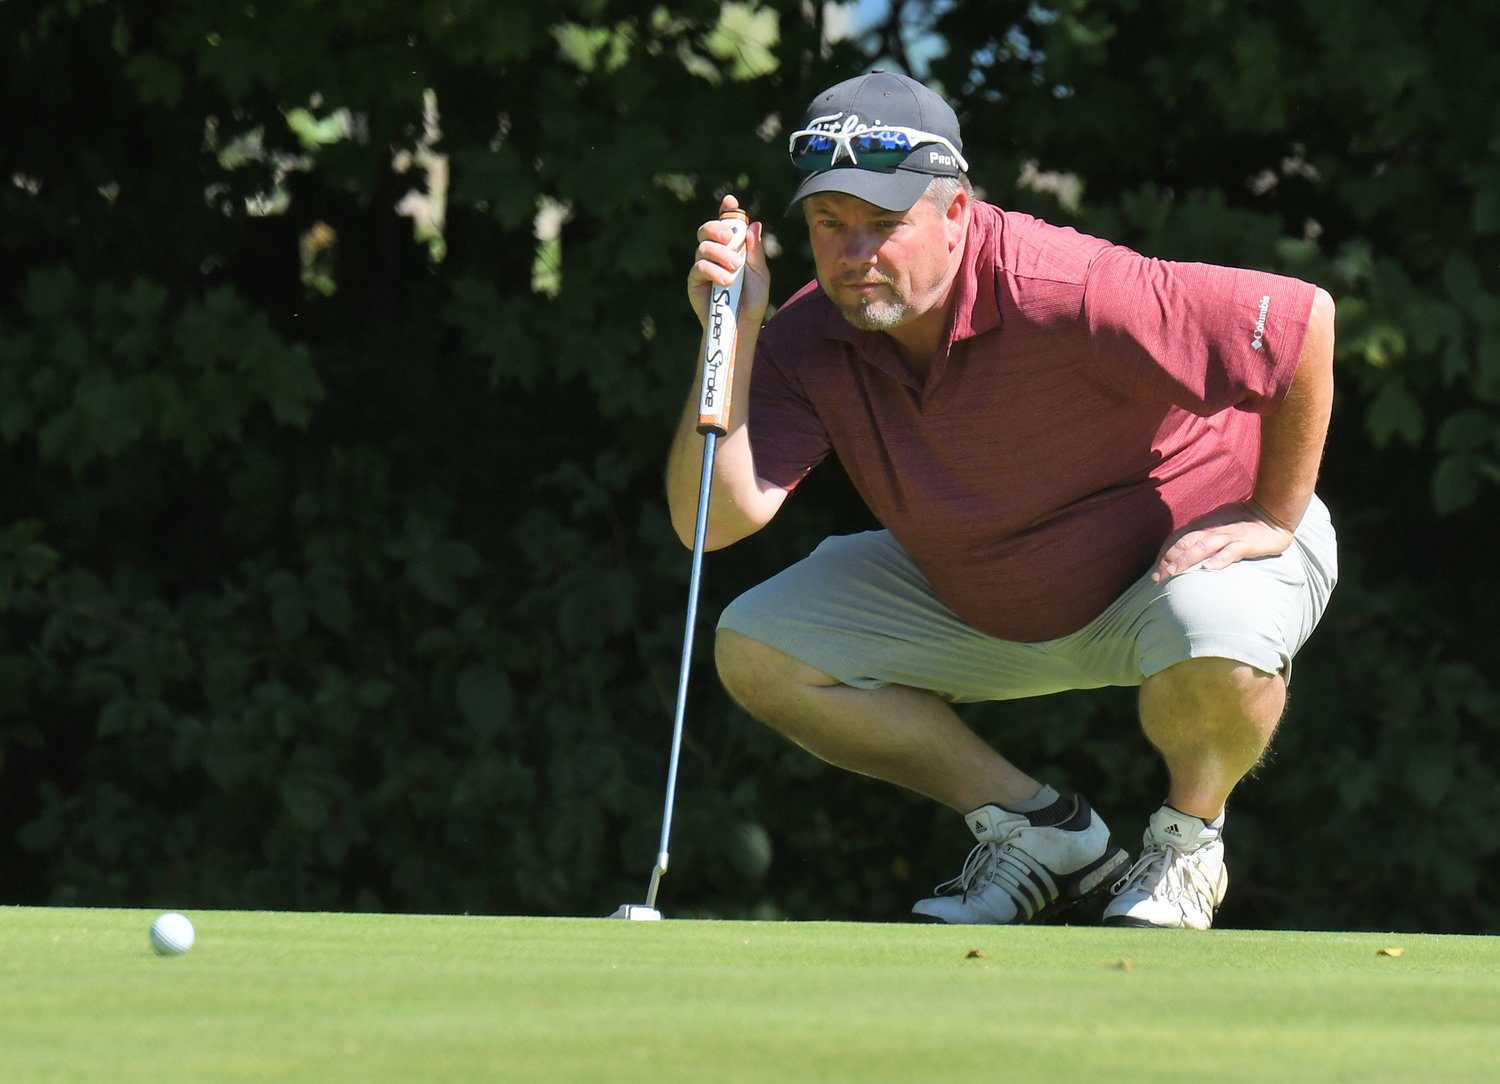 Mark Powonsky lines up a putt on the par 5 15th hole on Sunday afternoon at McConnellsville Country Club during the final round of the Rome City Men's Amateur Golf Championship. Powonsky finished 13th with a two-day score of 165.